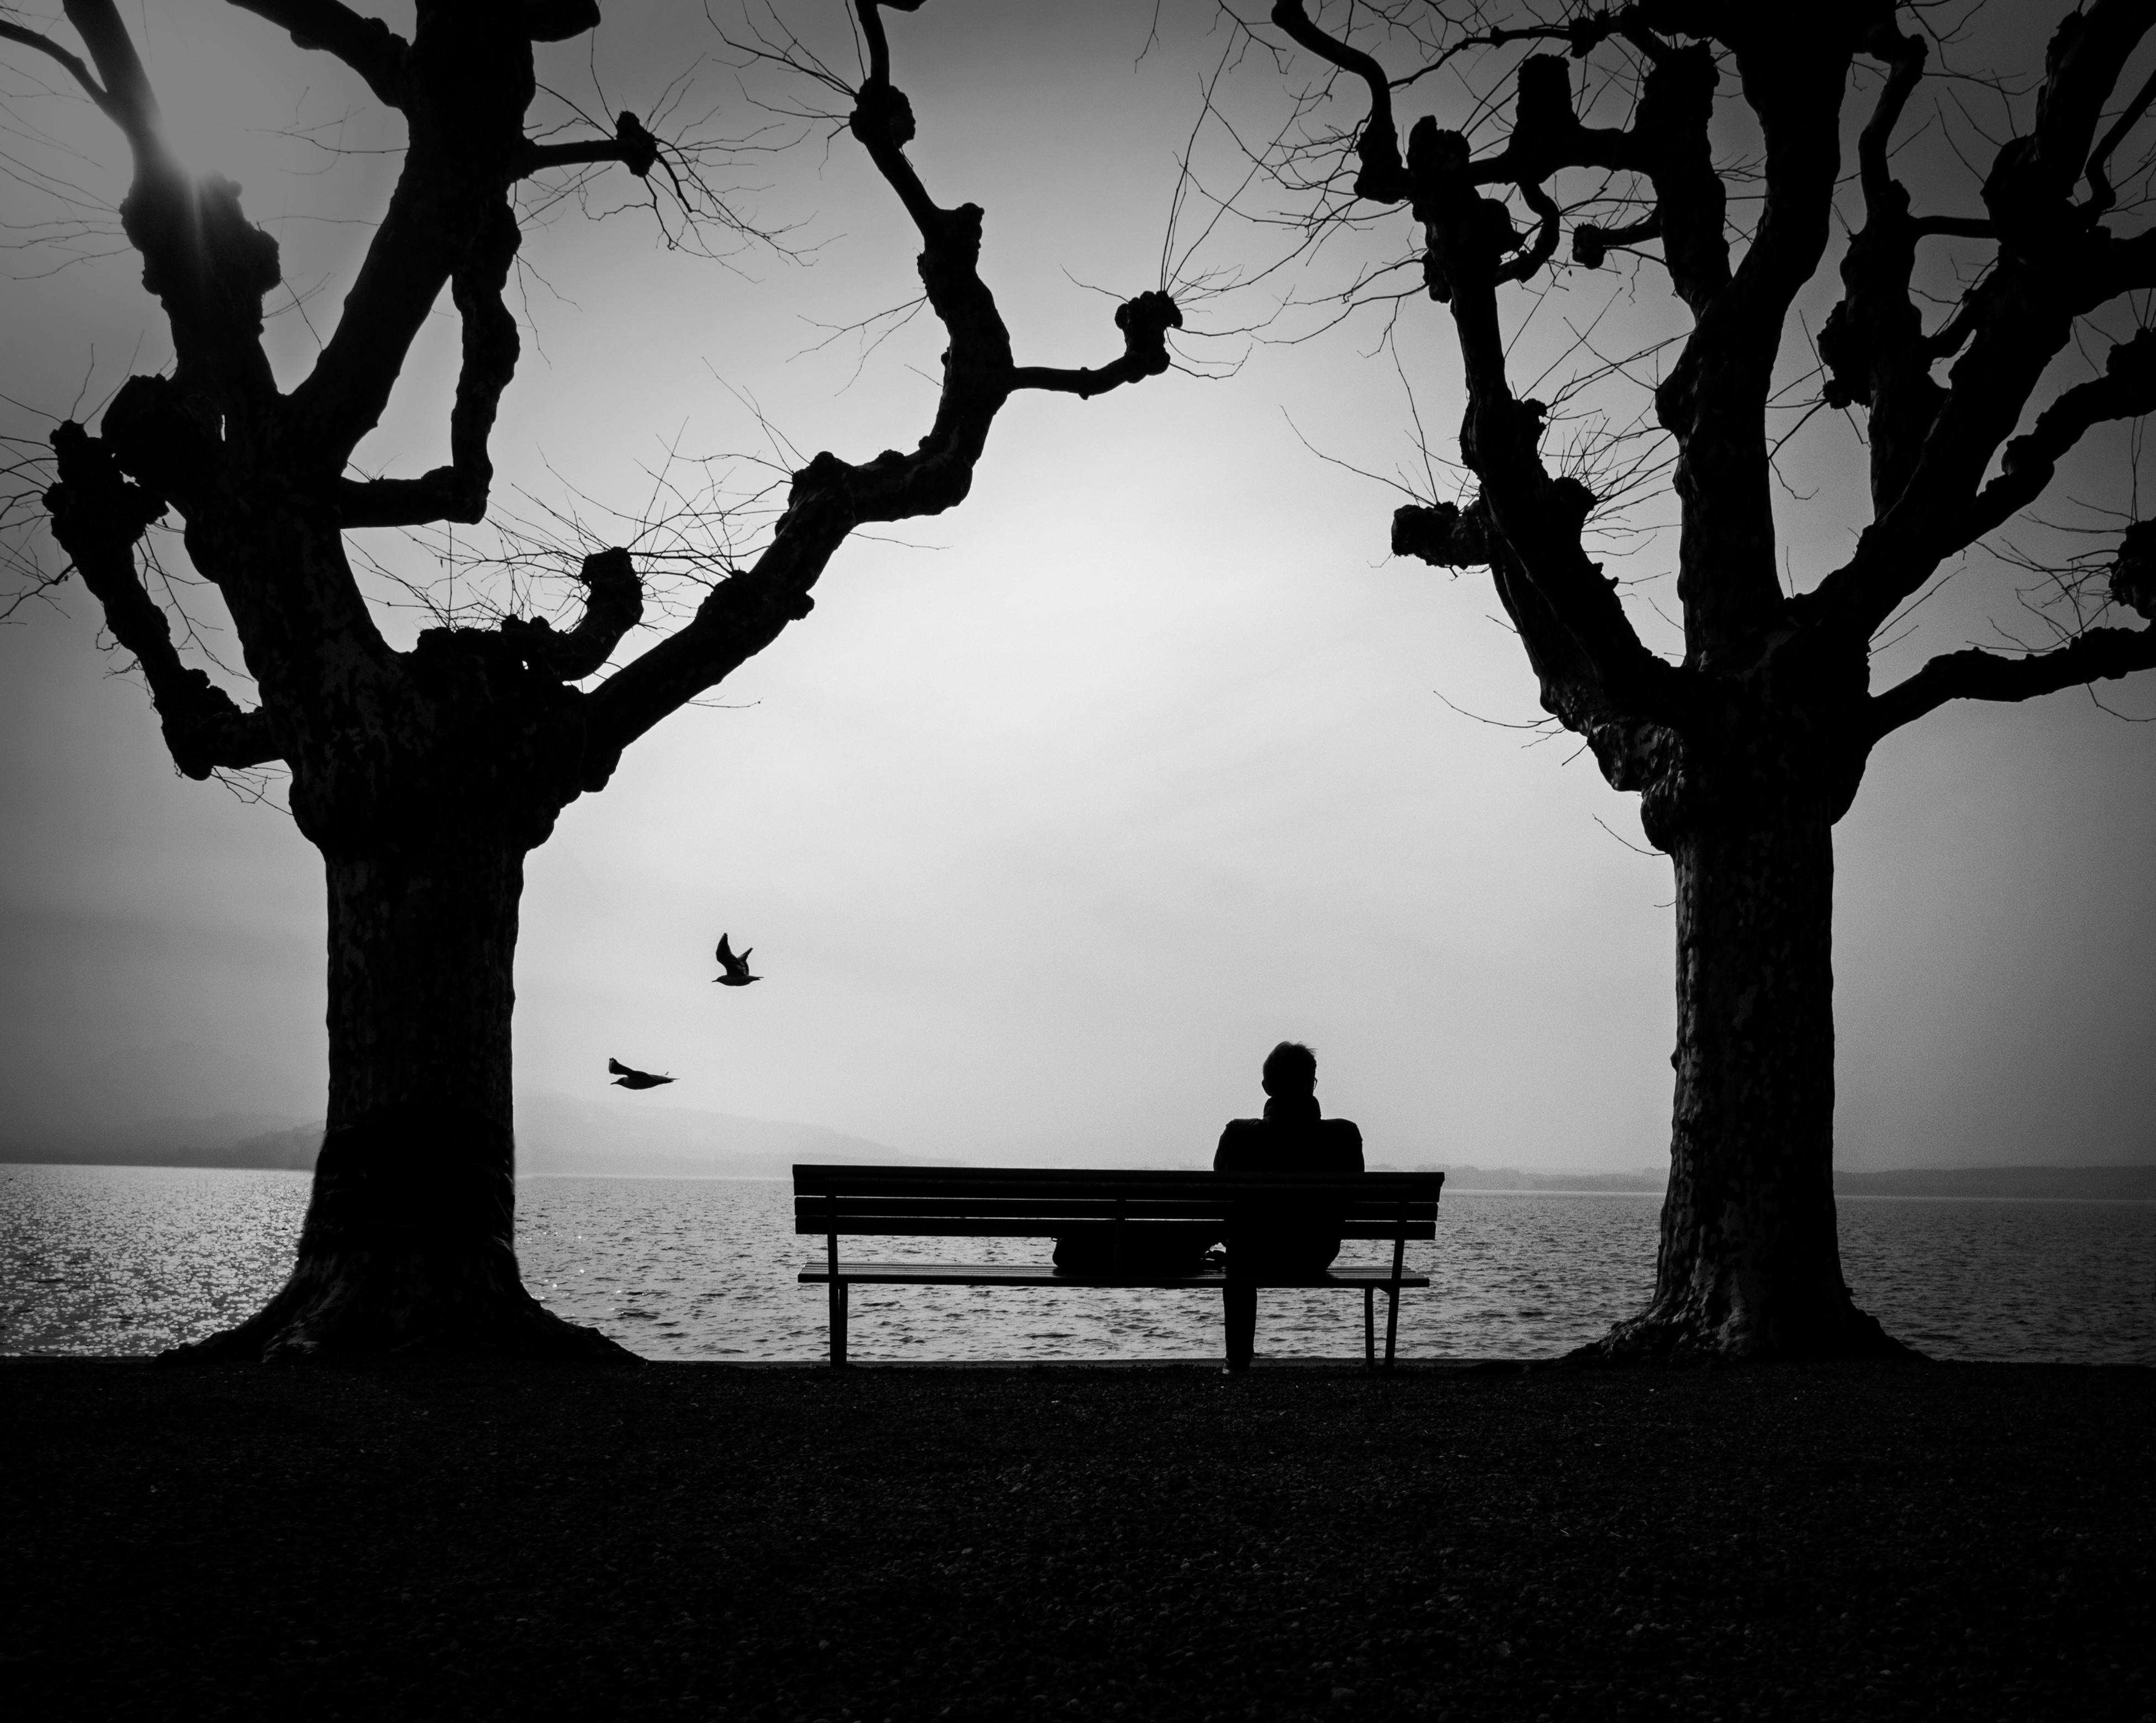 alone, bench, loneliness, lonely, silhouette, miscellanea, miscellaneous High Definition image